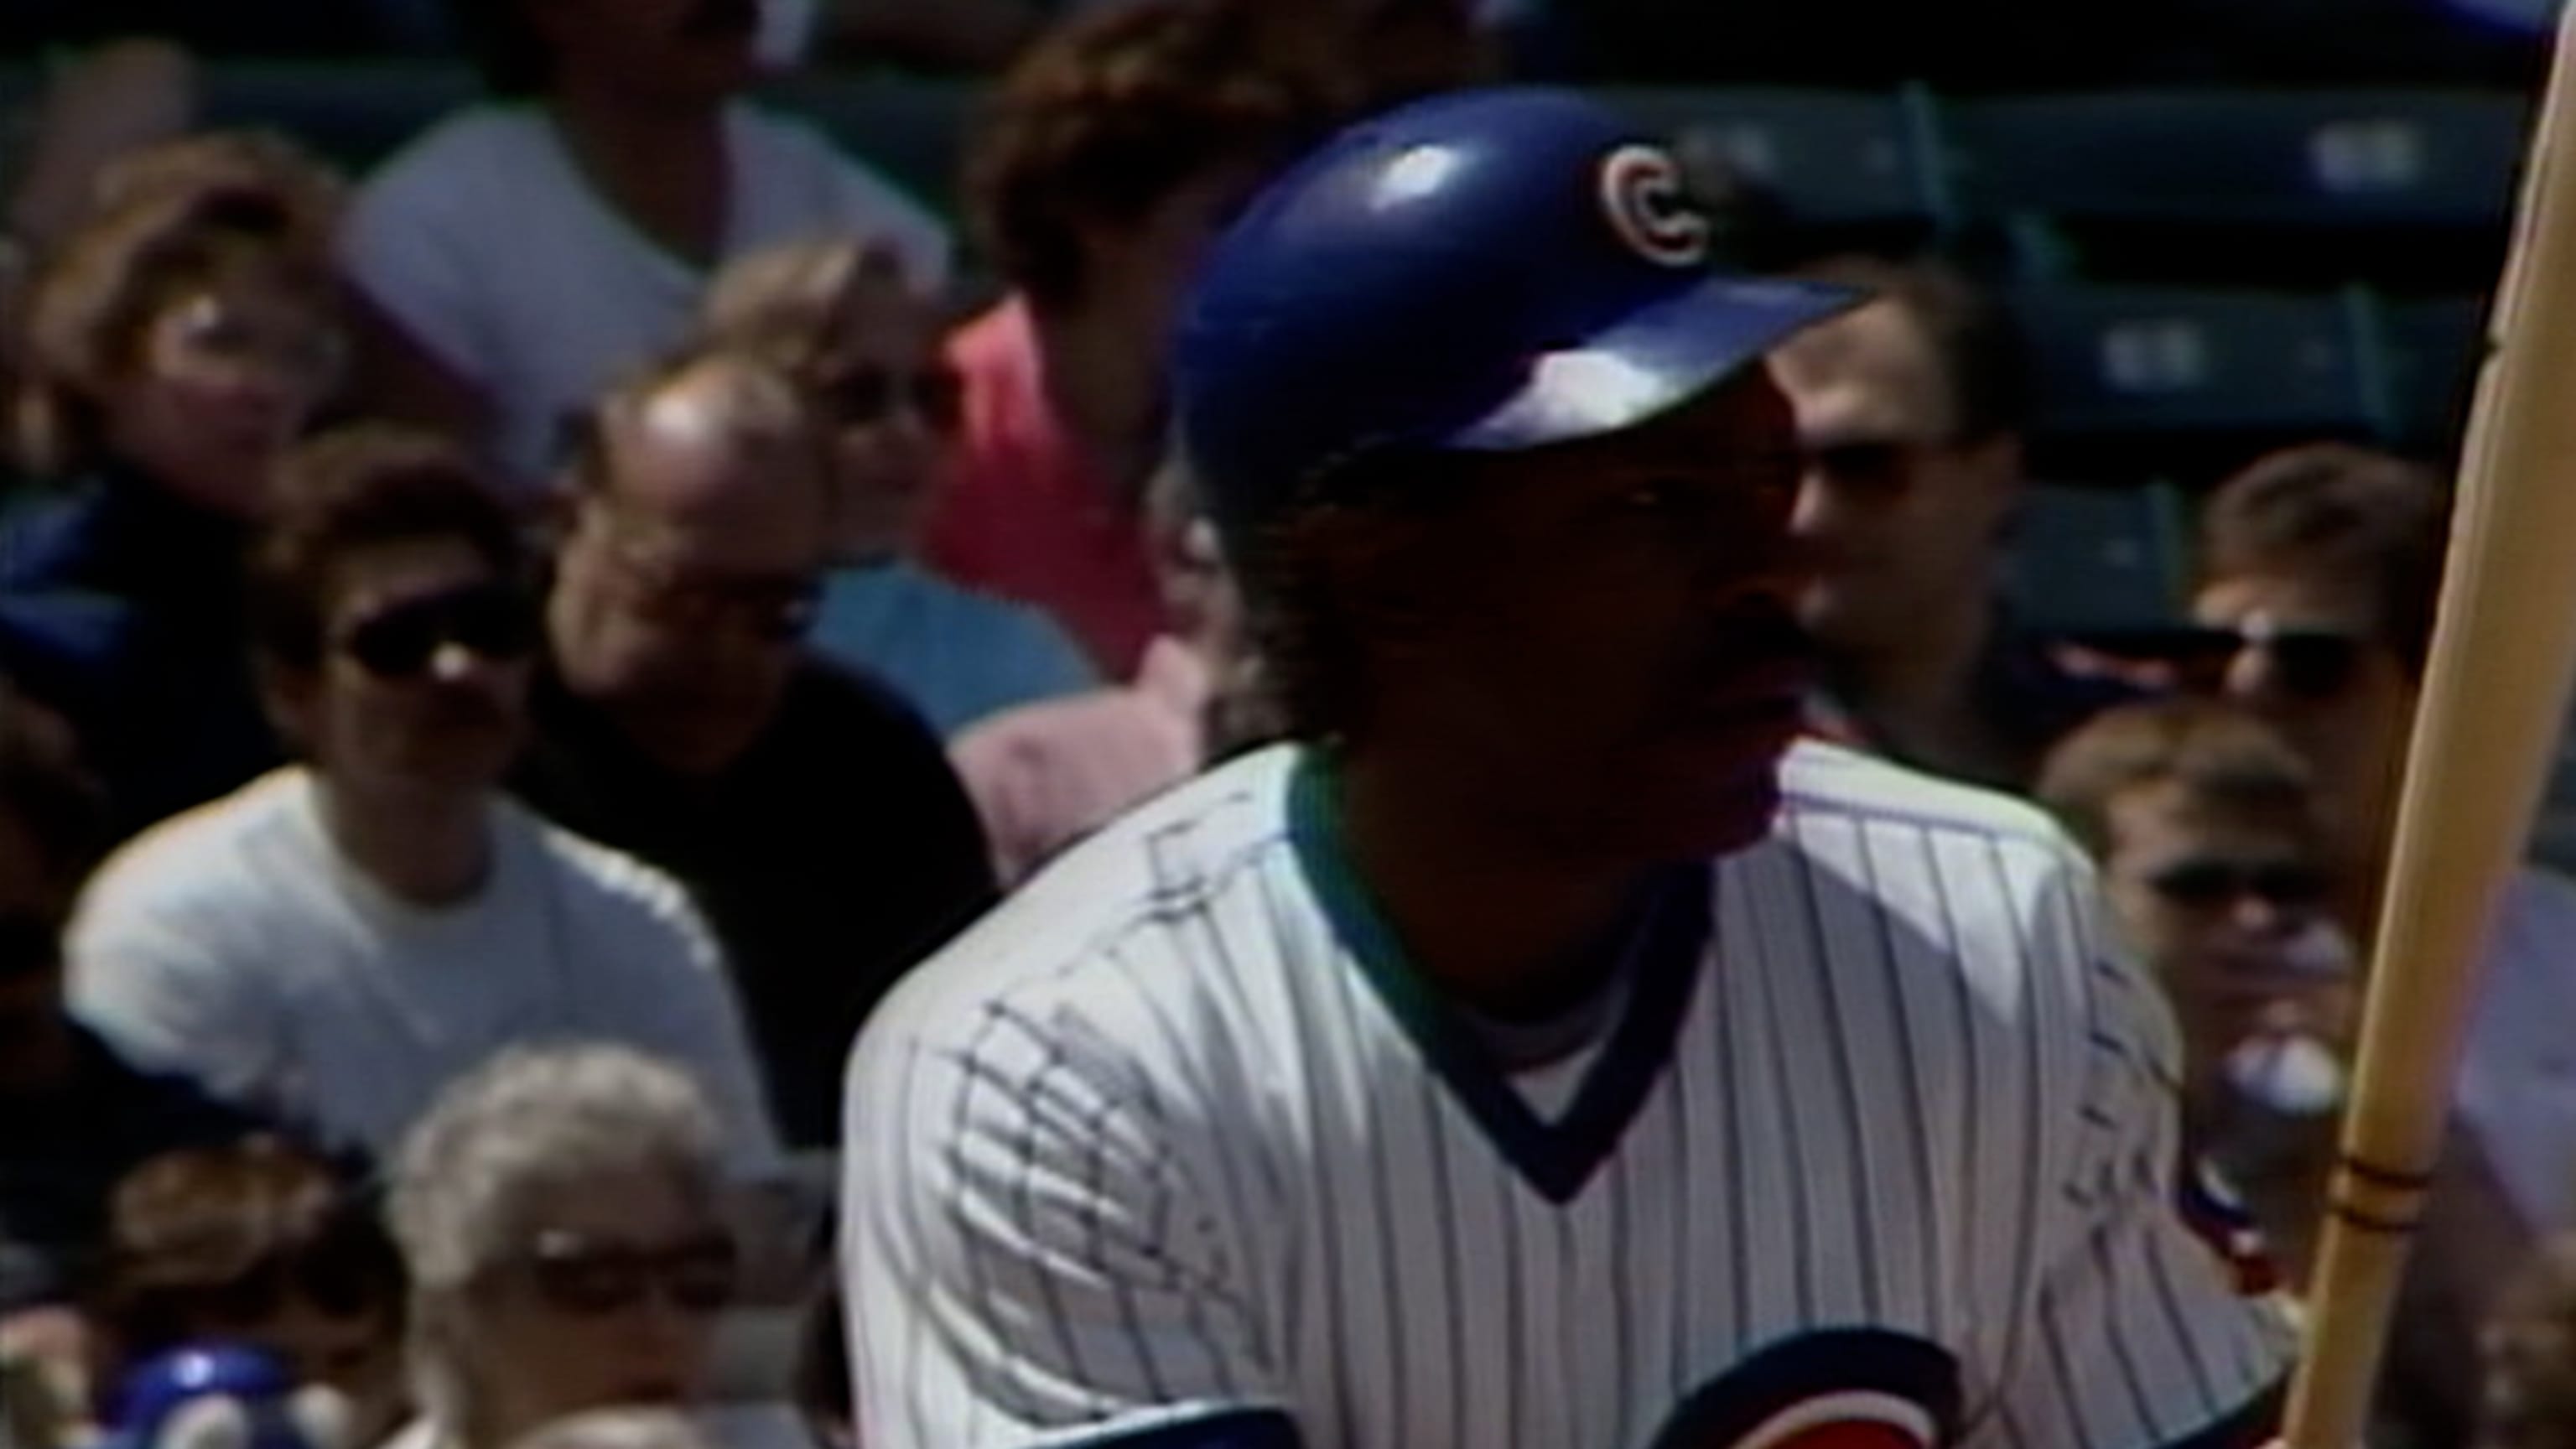 Baseball Hall of Famer Andre Dawson emphasizes to never stop dreaming